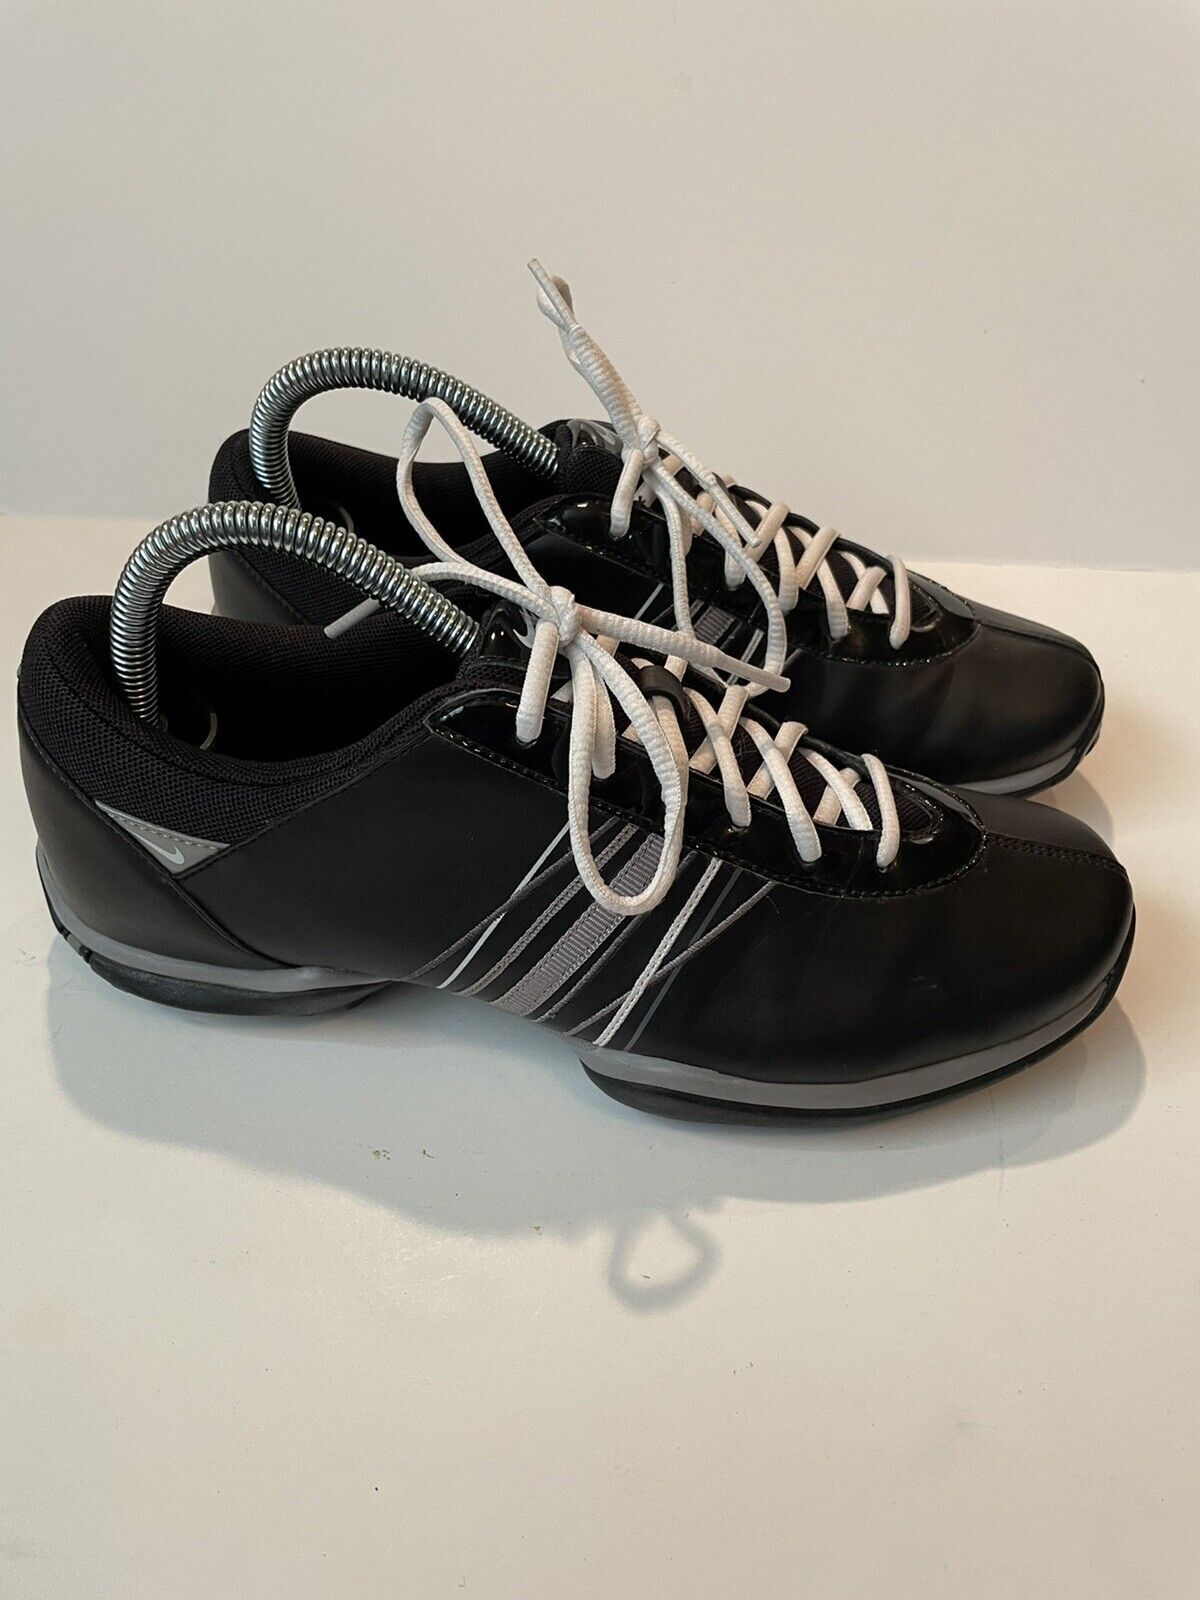 Primary image for Nike Golf Delight Tac Cleats Womens Size 8 Black Shoes Leather 418355-001 EUC